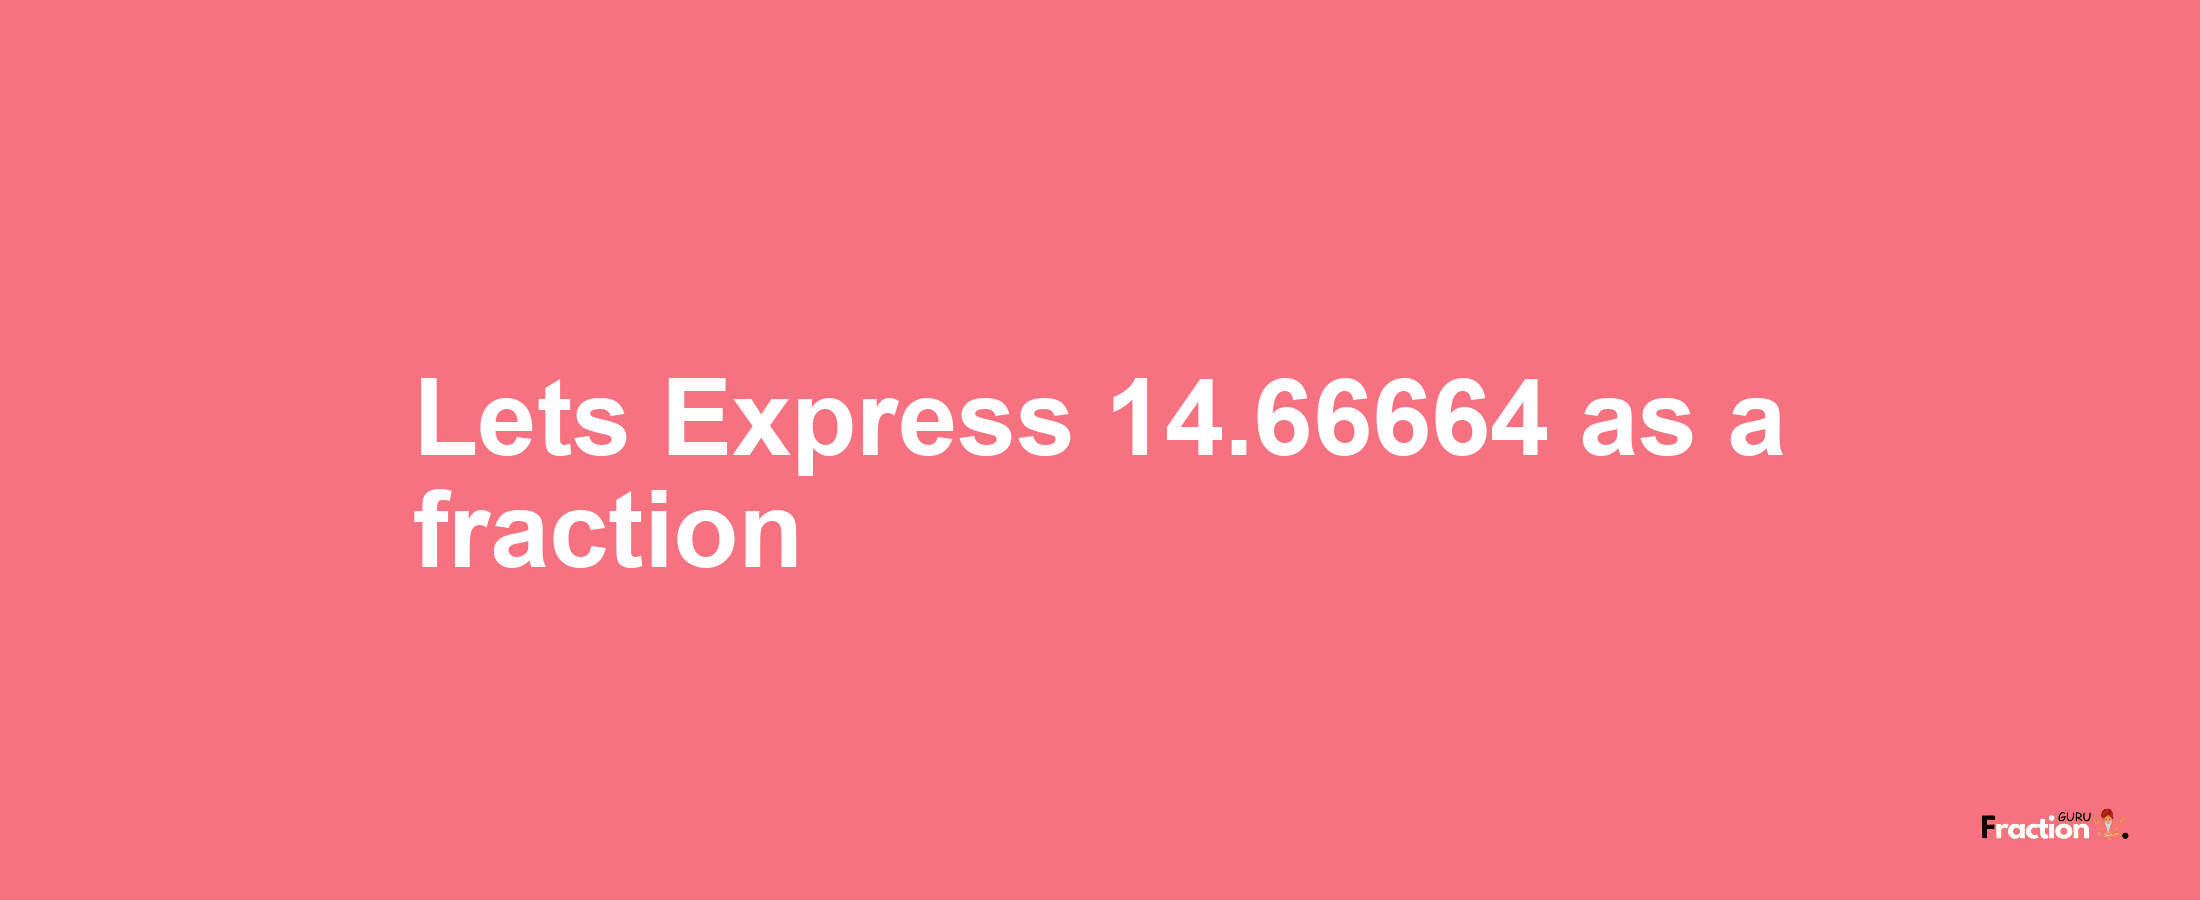 Lets Express 14.66664 as afraction